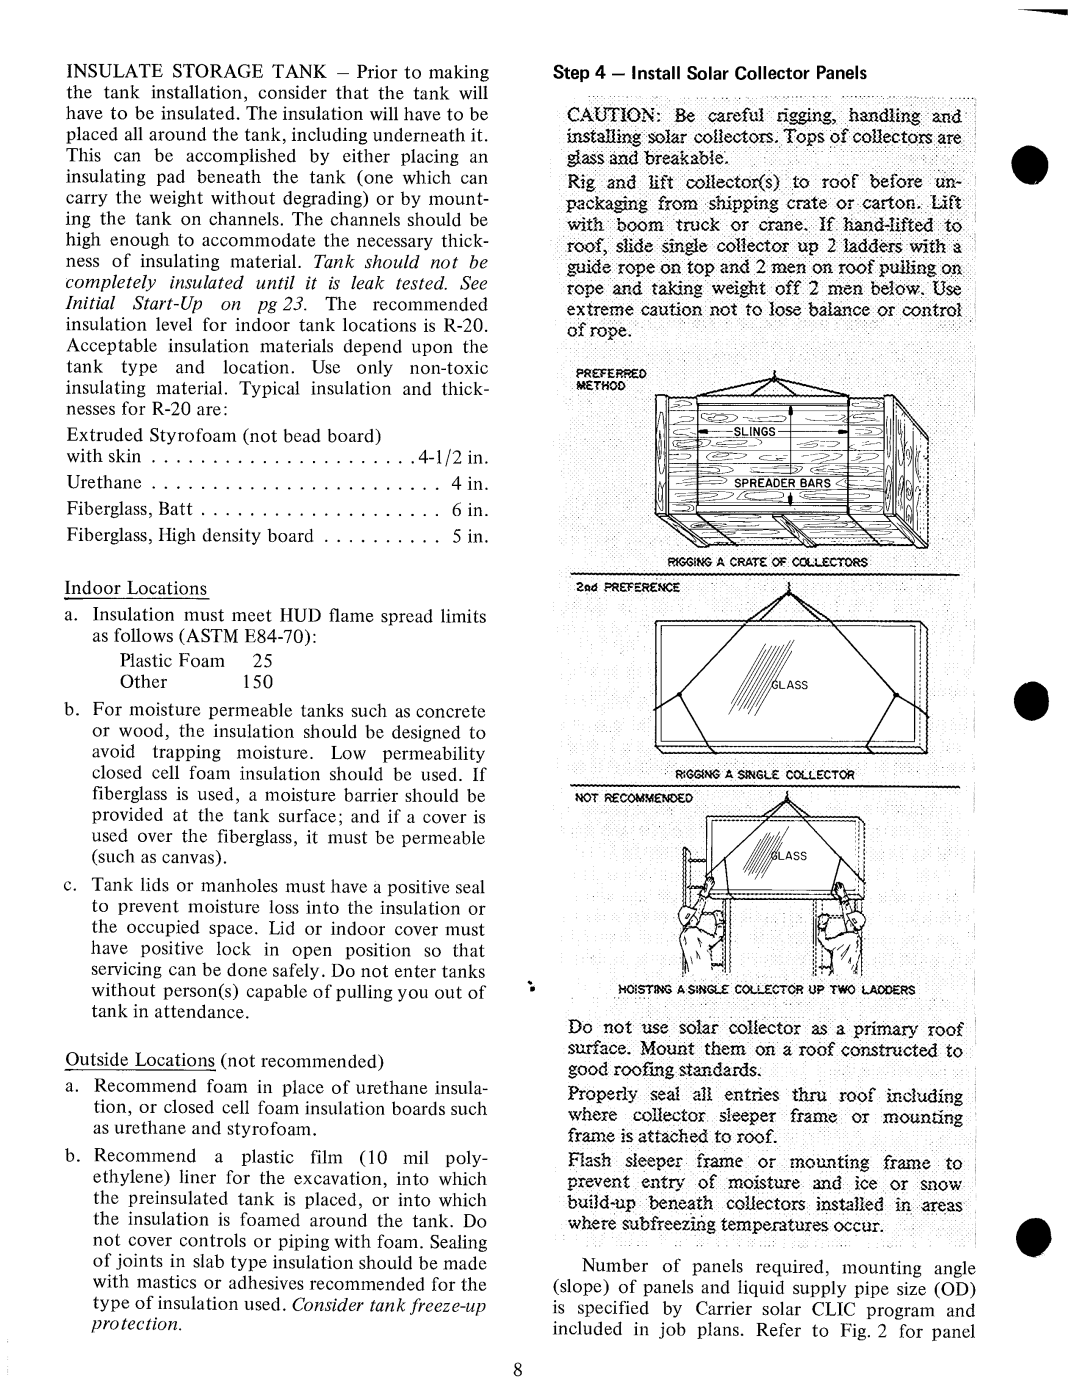 Carrier 28QX manual 